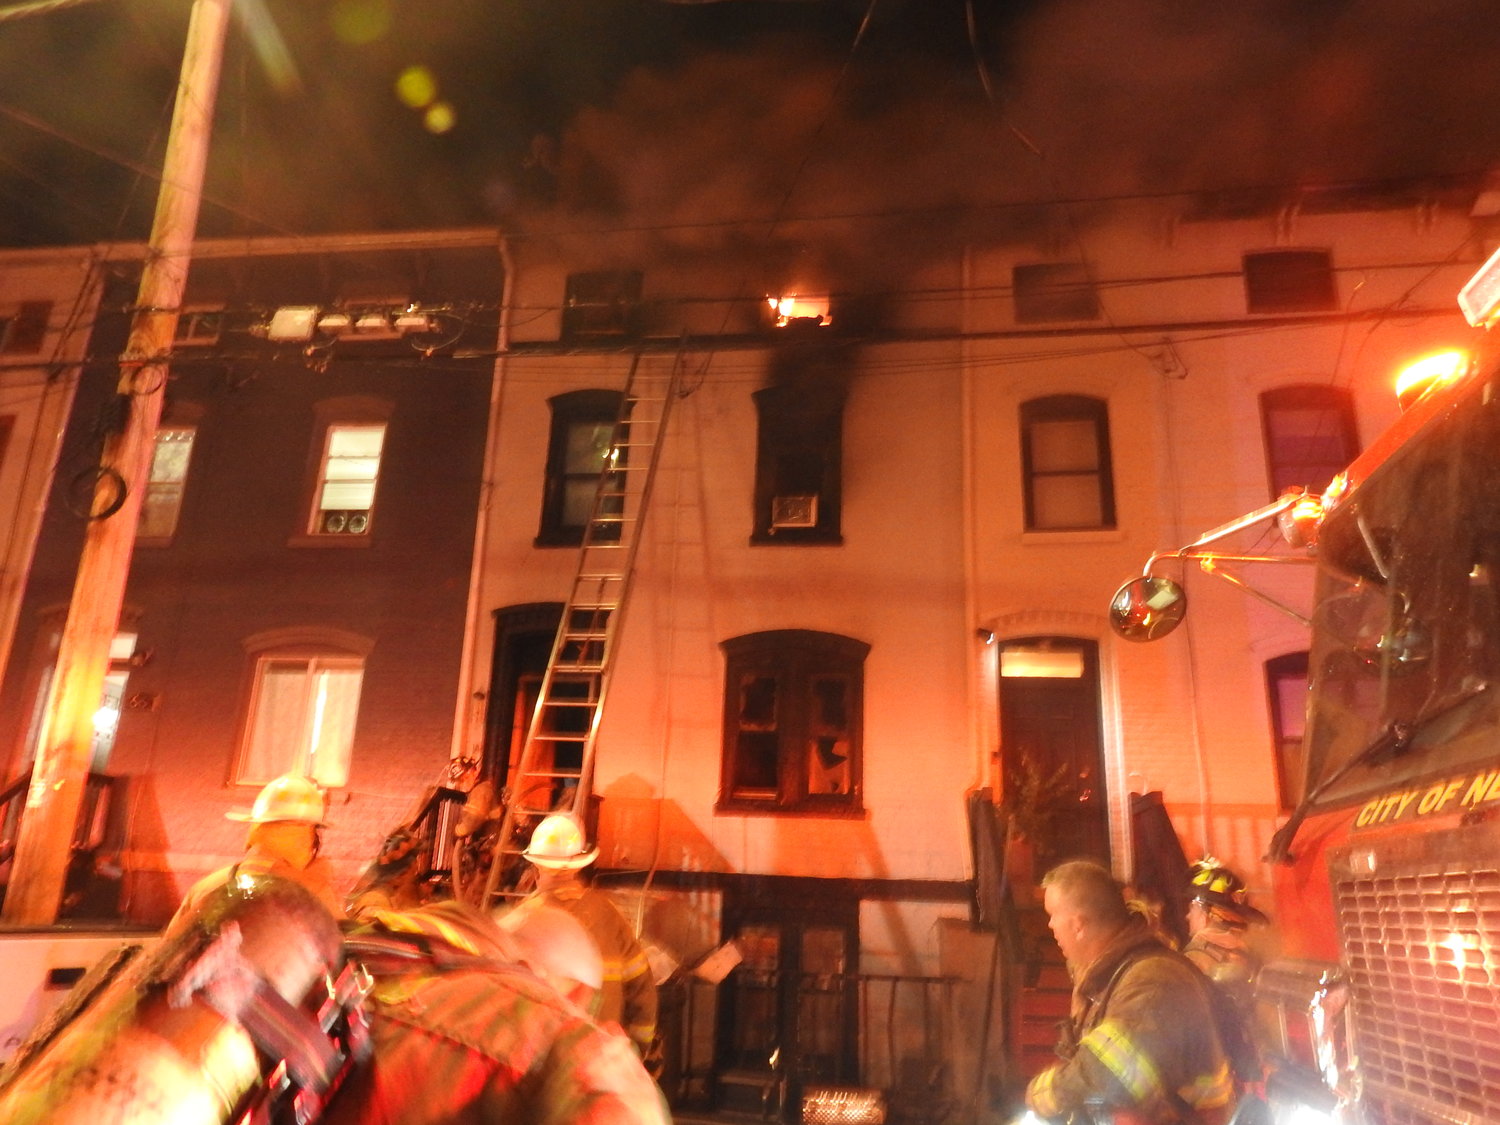 Firefighters battling a fire at 68 Lander Street in the City of Newburgh